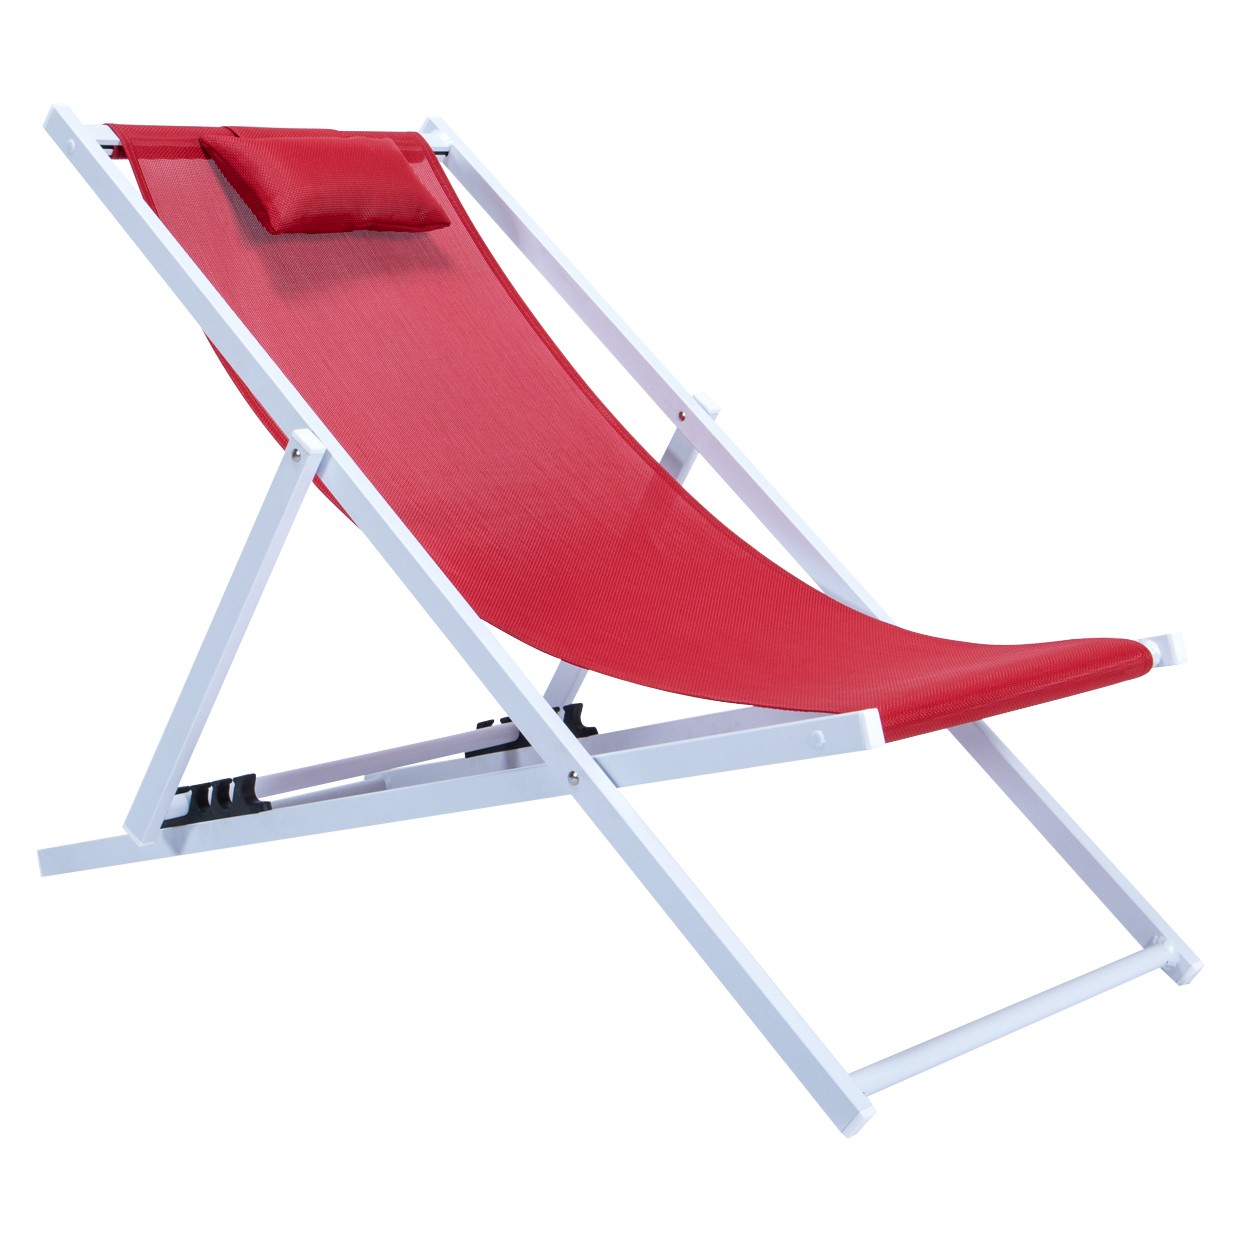 LeisureMod Sunset Outoor Sling Lounge Folding Chair With Headrest in Red - image 2 of 8